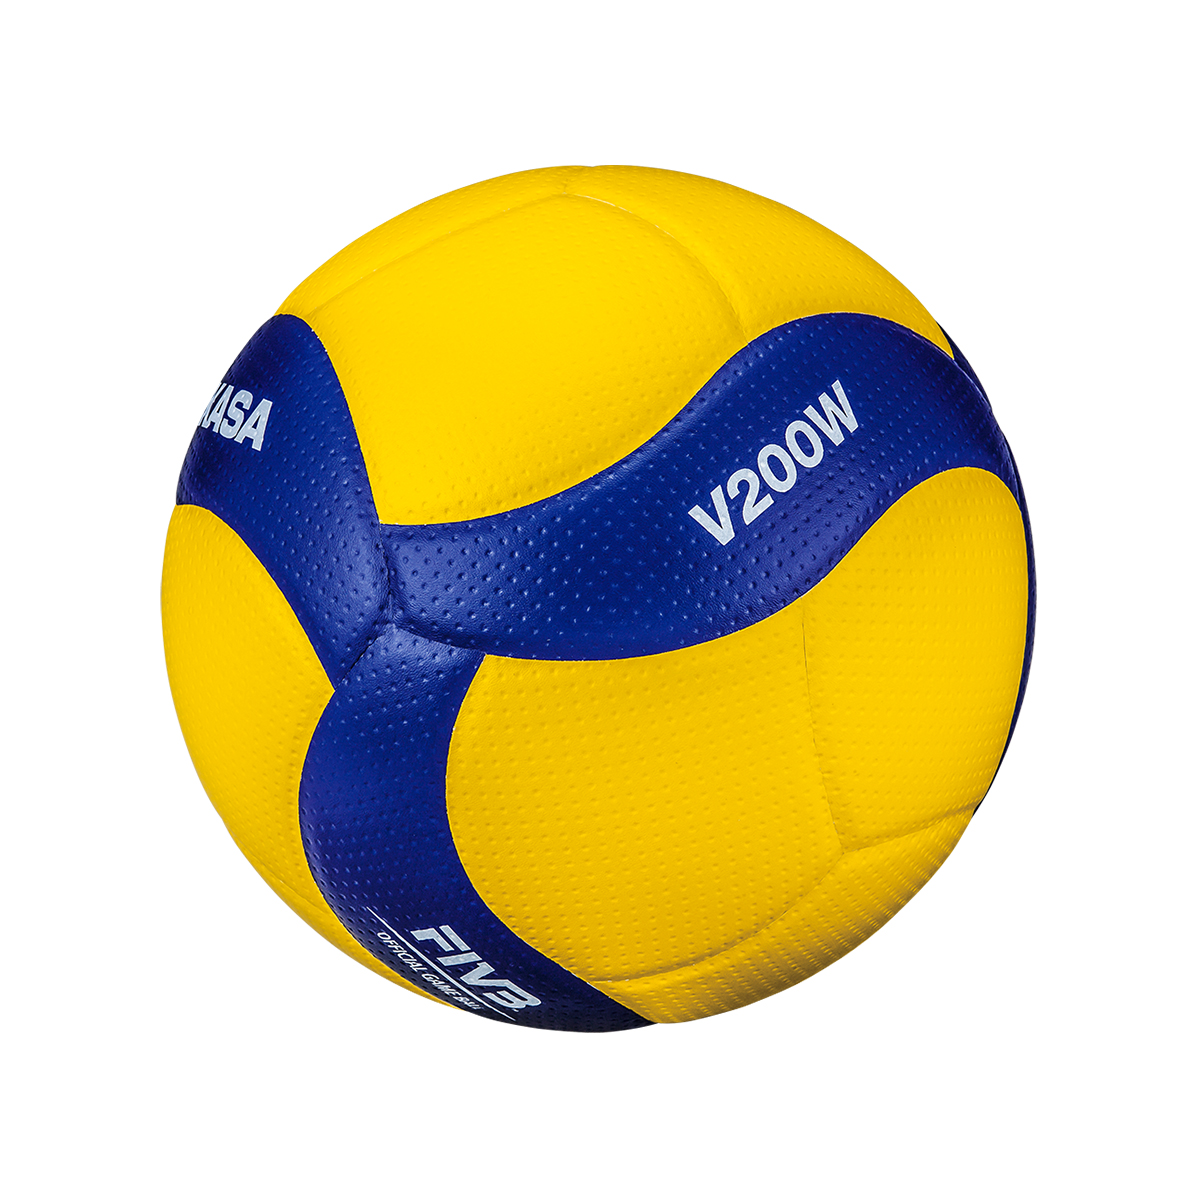 MIKASA V200W VW SERIES VOLLEYBALL DOUBLE DIMPLED 18 PANEL SIZE 5